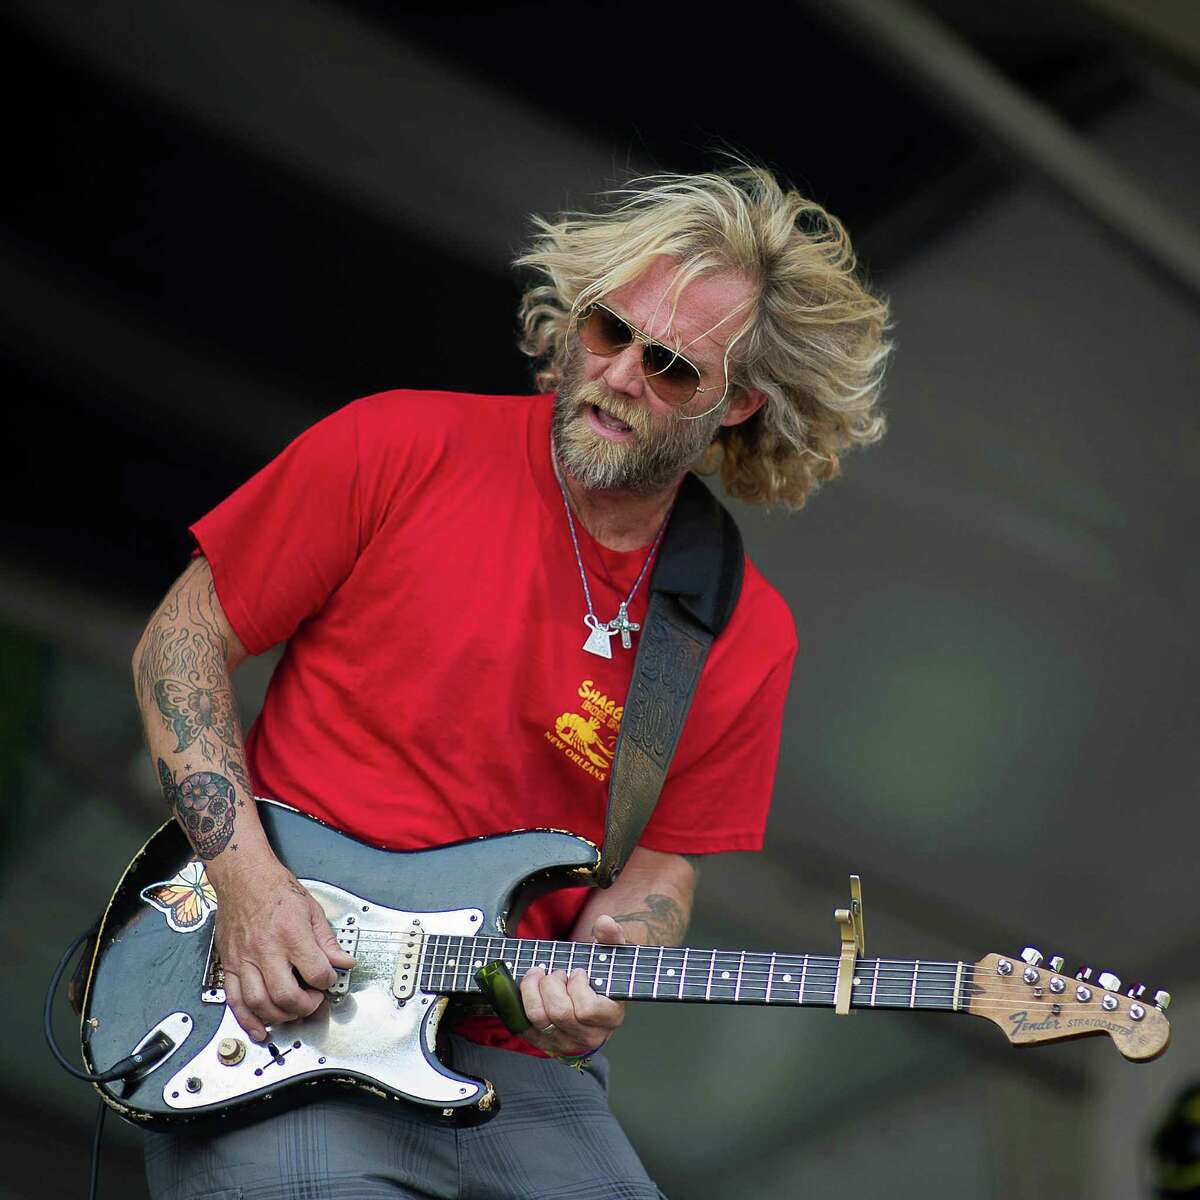 Blues rocker Anders Osborne will perform at the Blues, Views and BBQ Festival on Saturday, Aug. 30, 2014, from 6 to 7:30 p.m. It is his third time at the event, which features other artists, including the Spin Doctors, Rory Block and Coco Montoya Band. For more information, visit www.bluesviewsbbq.com.